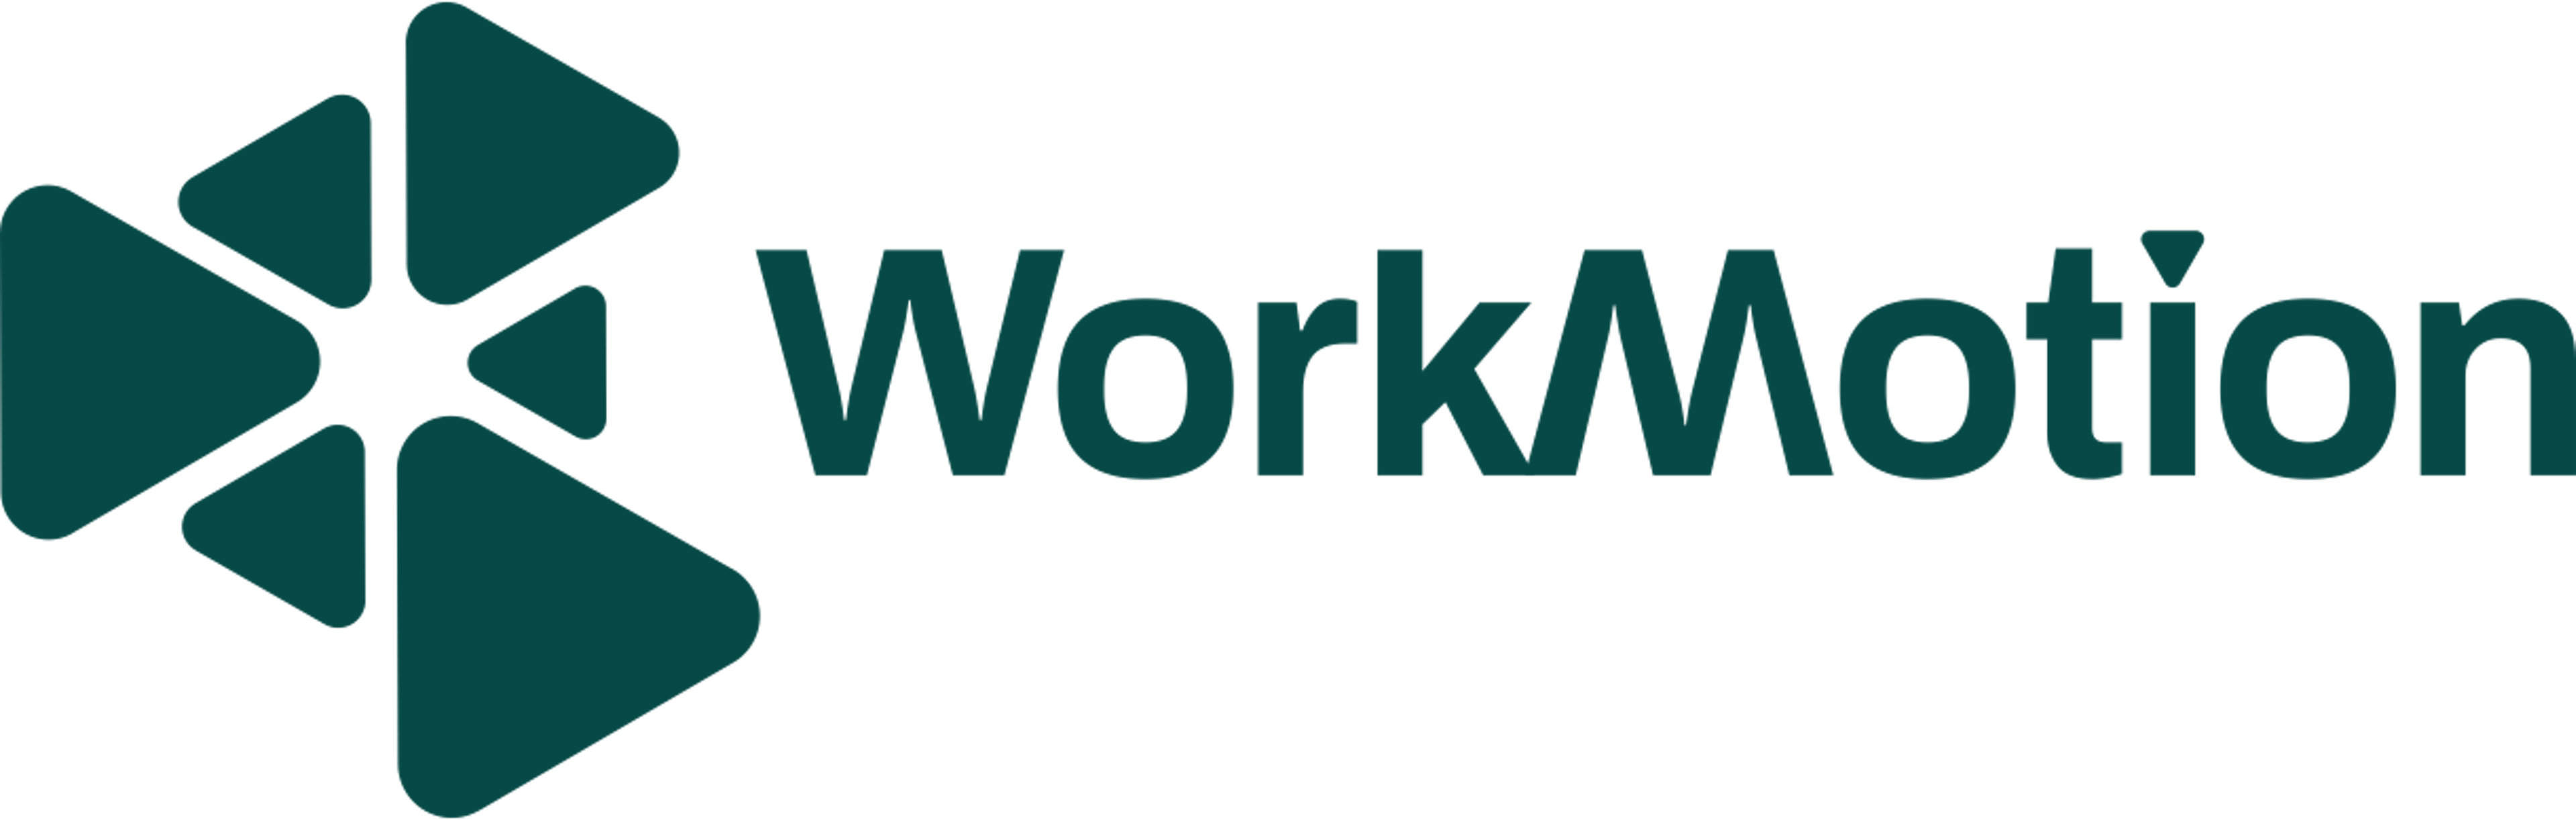 WorkMotion